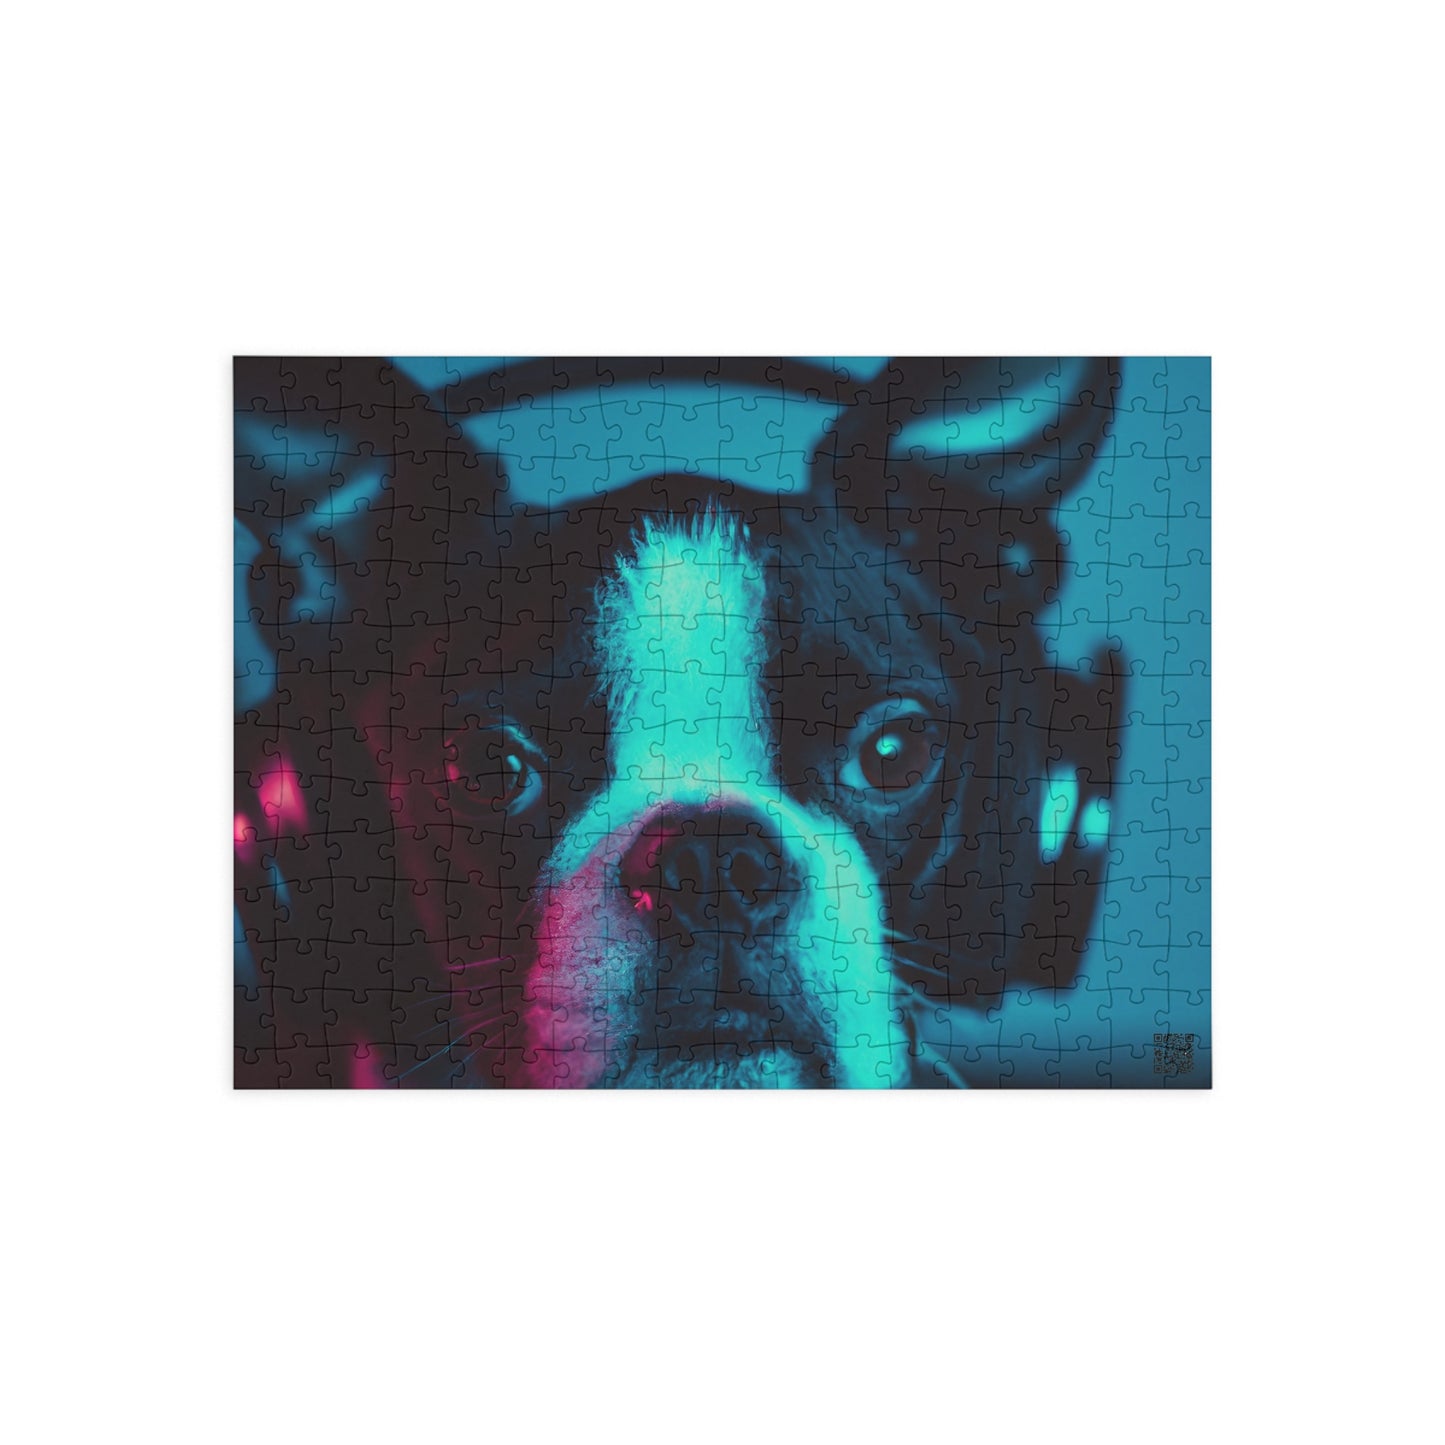 Lord/Lady Winwood of Boston - Boston Terrier - Puzzle